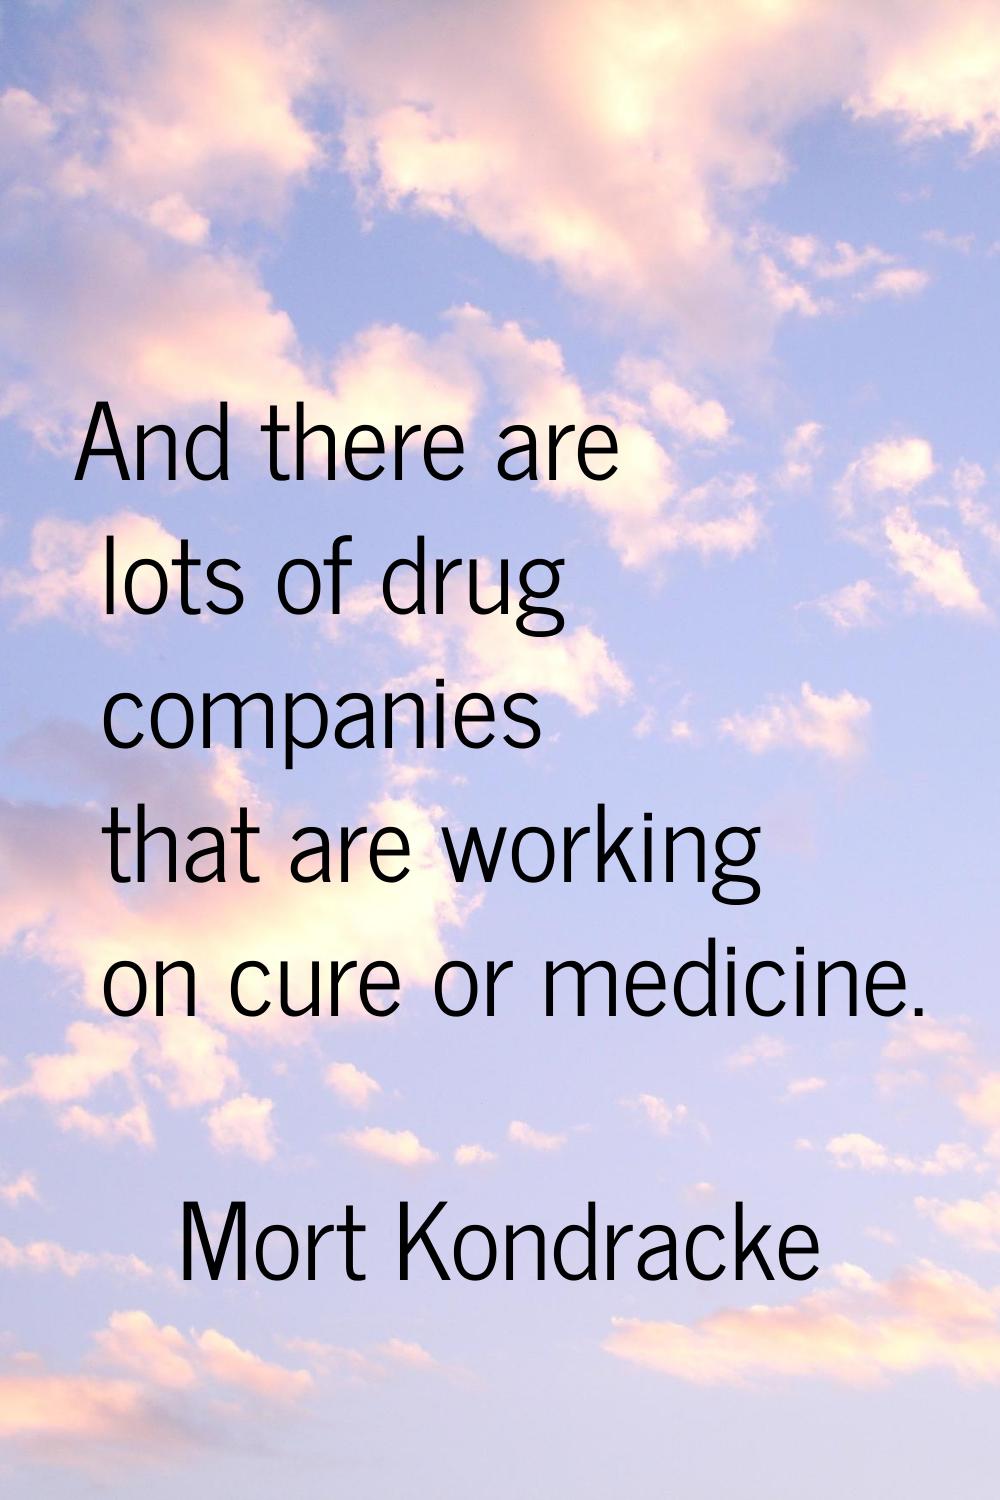 And there are lots of drug companies that are working on cure or medicine.